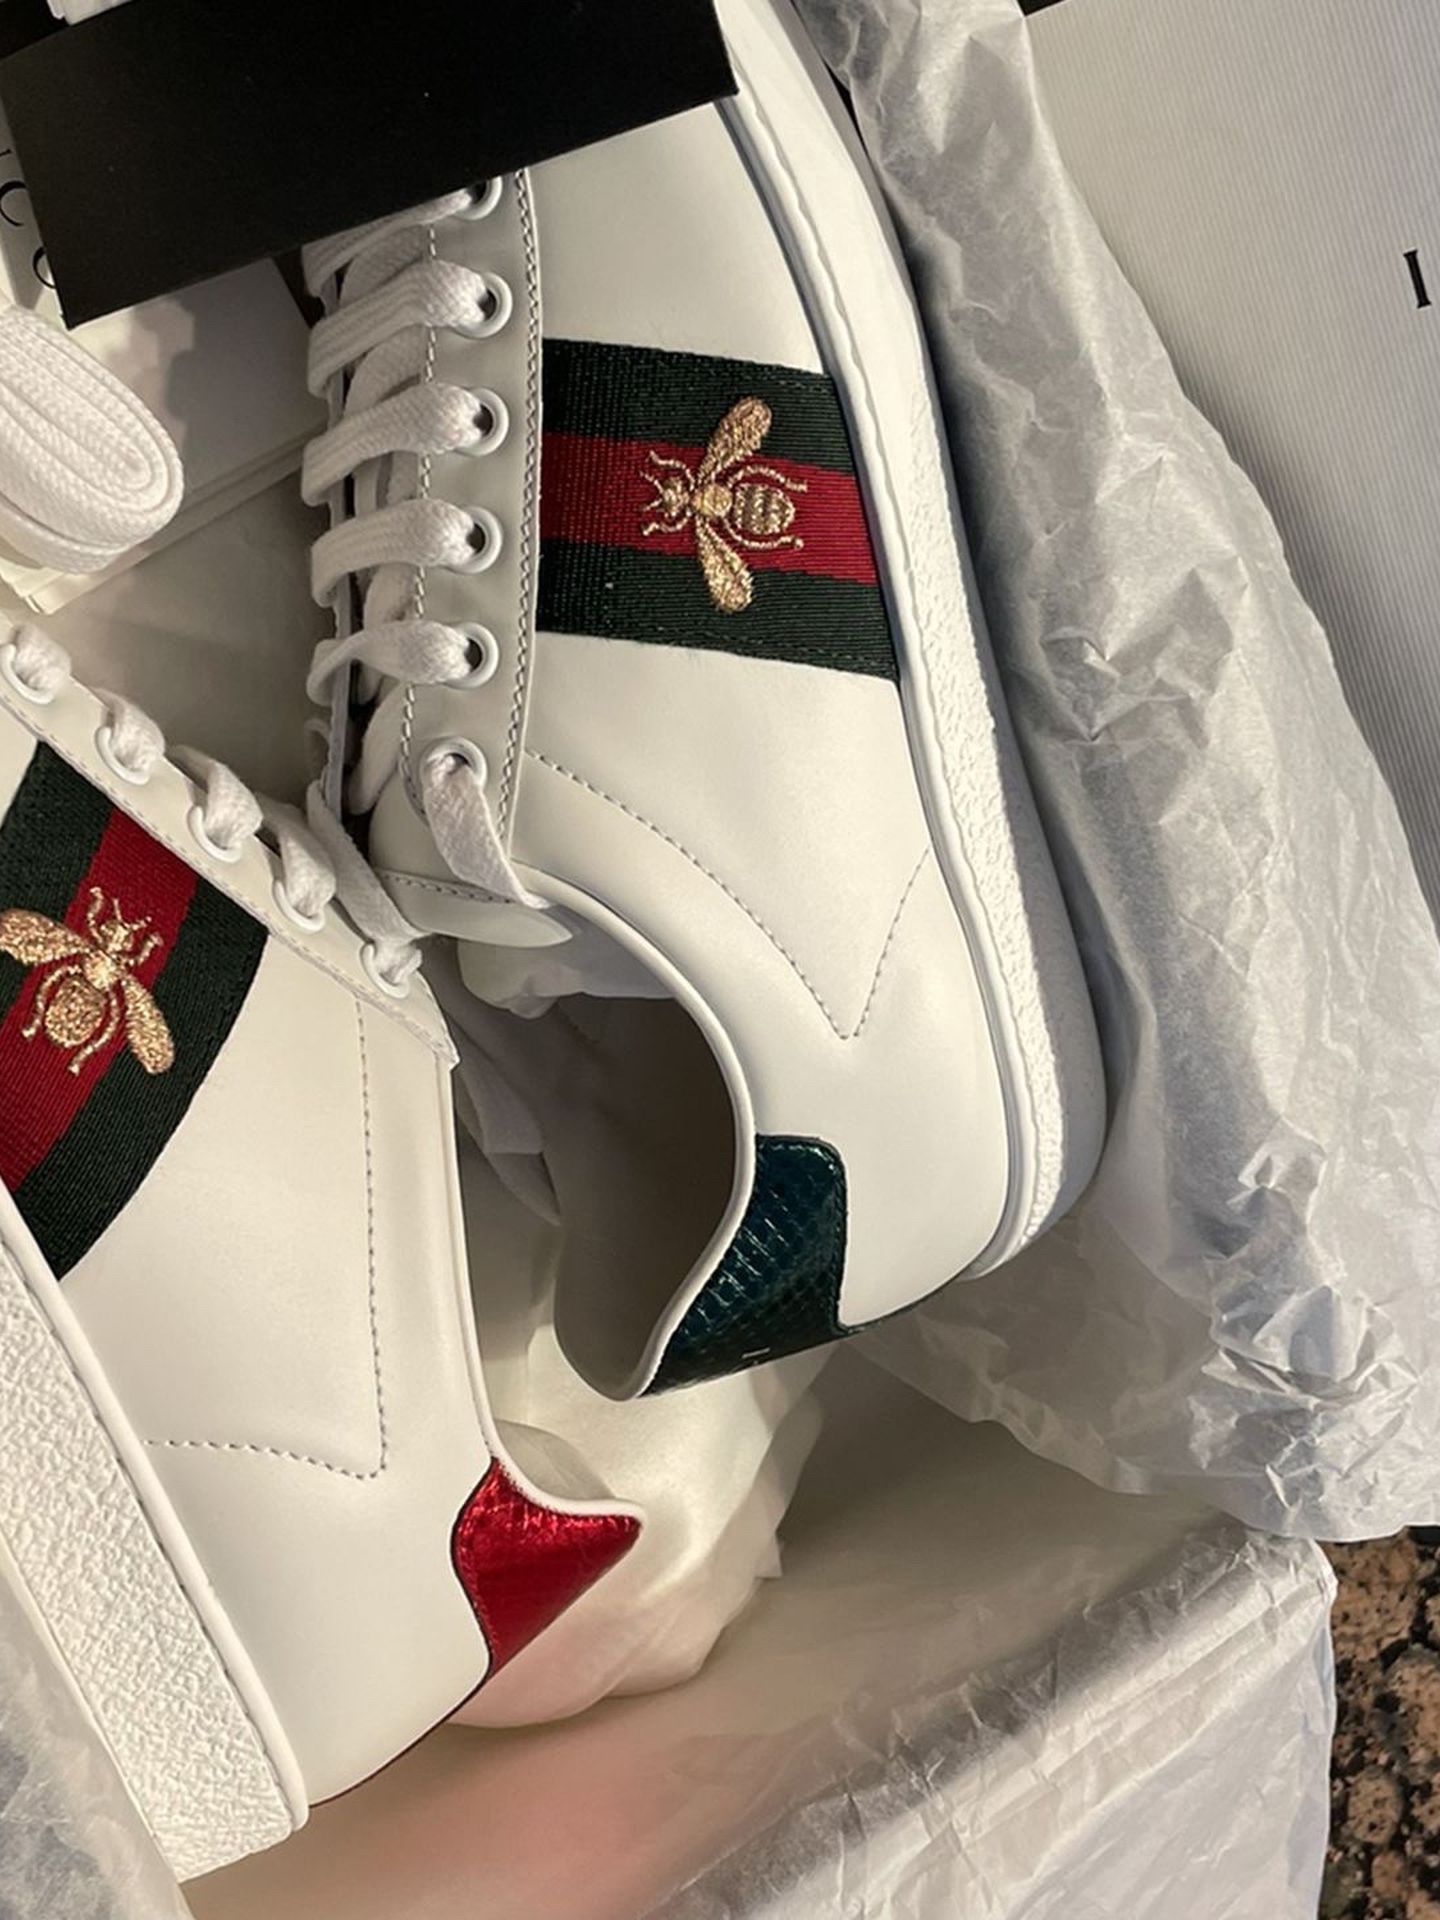 New woman’s Gucci sneakers size 7